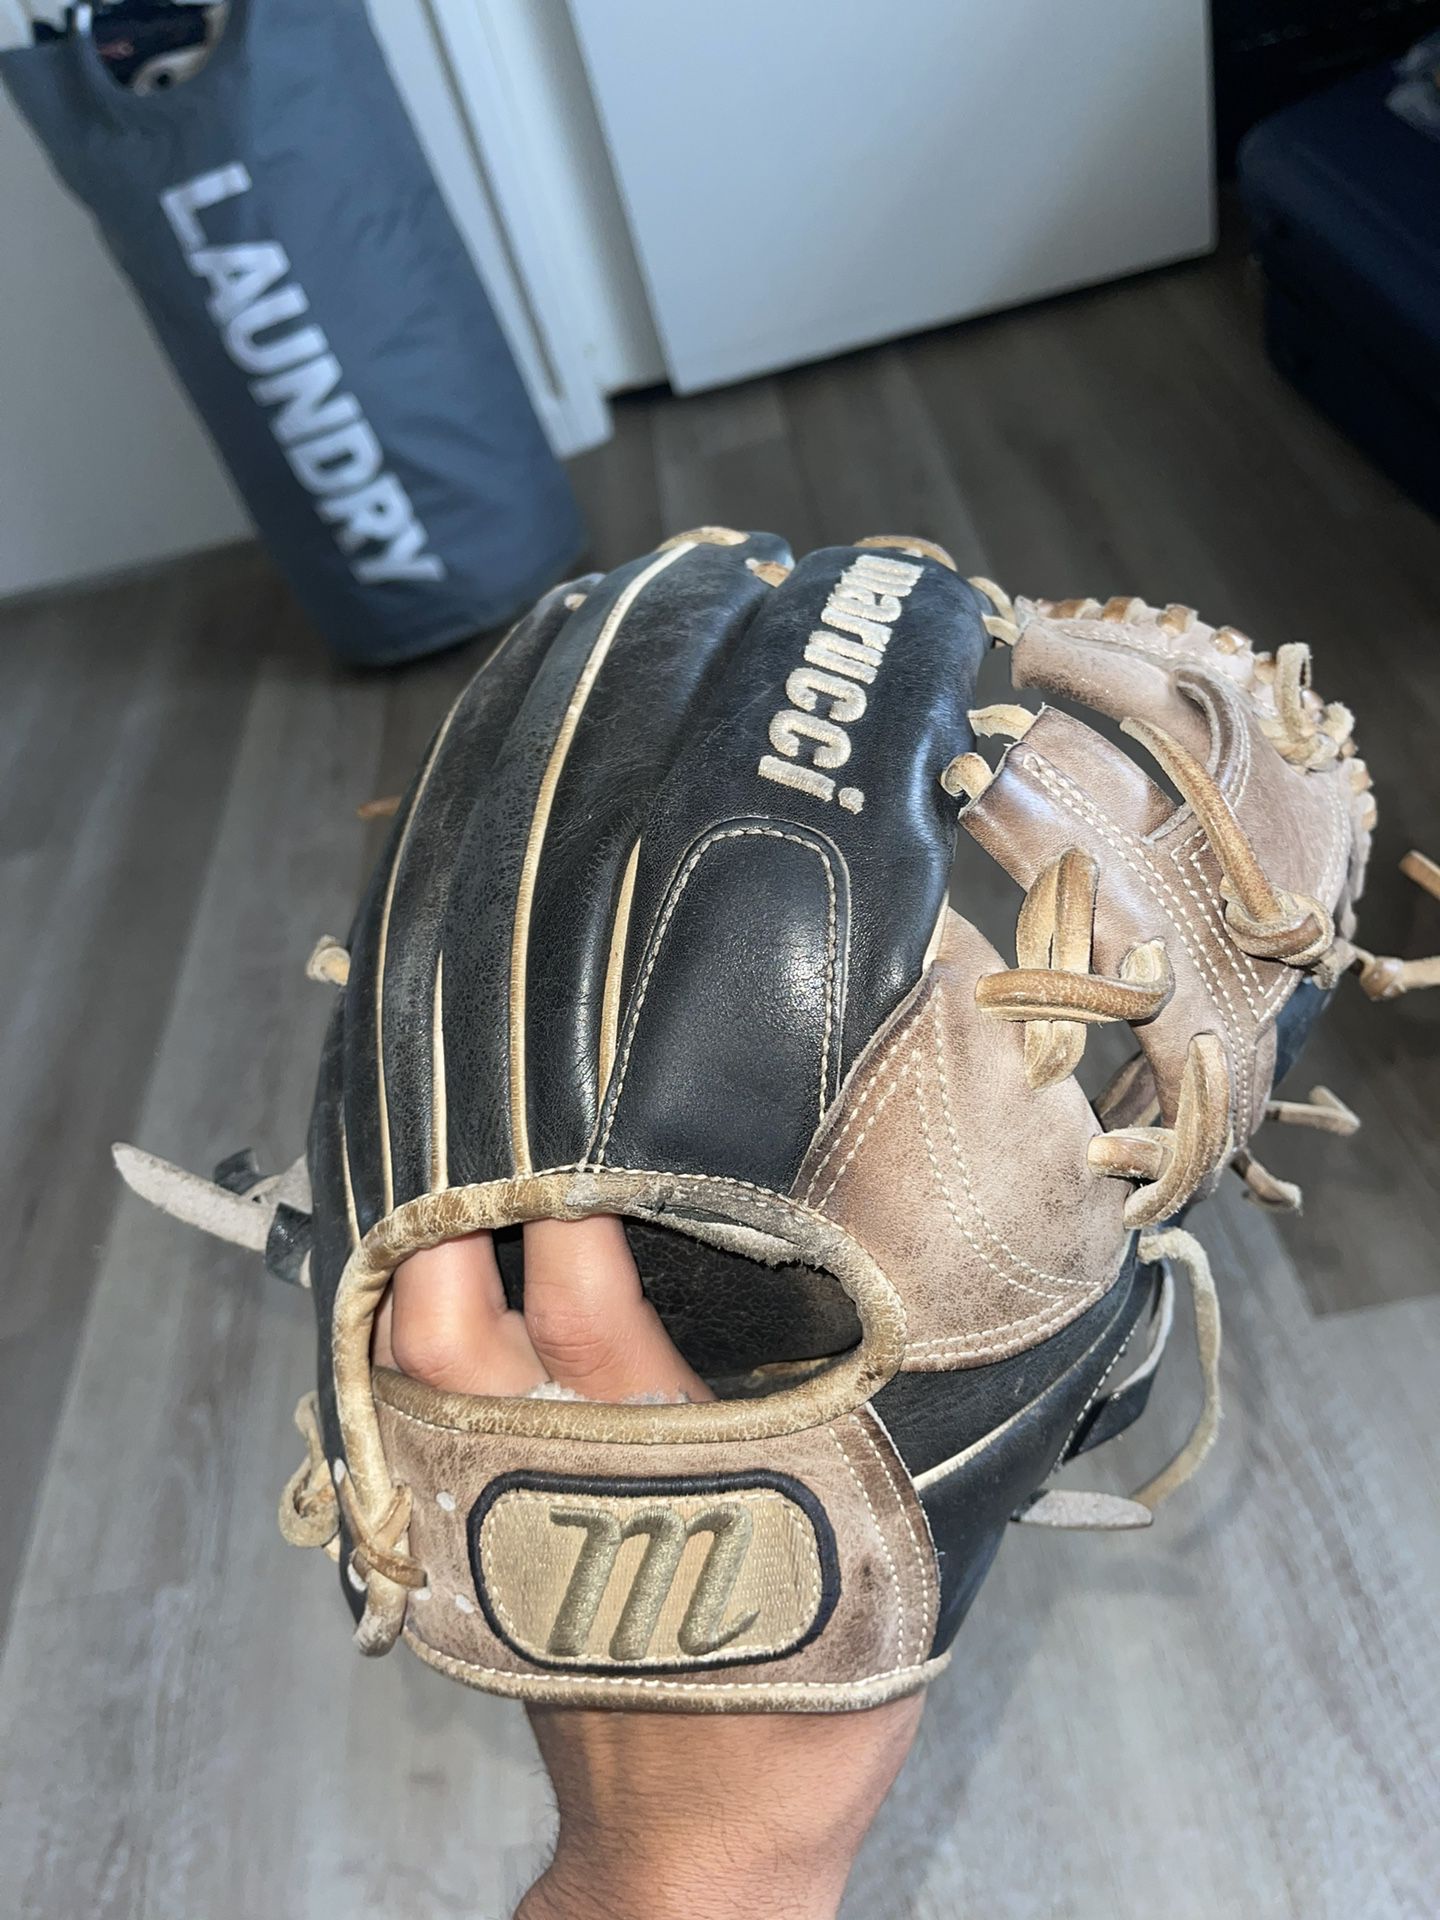 Marucci middle infield glove size 11.25